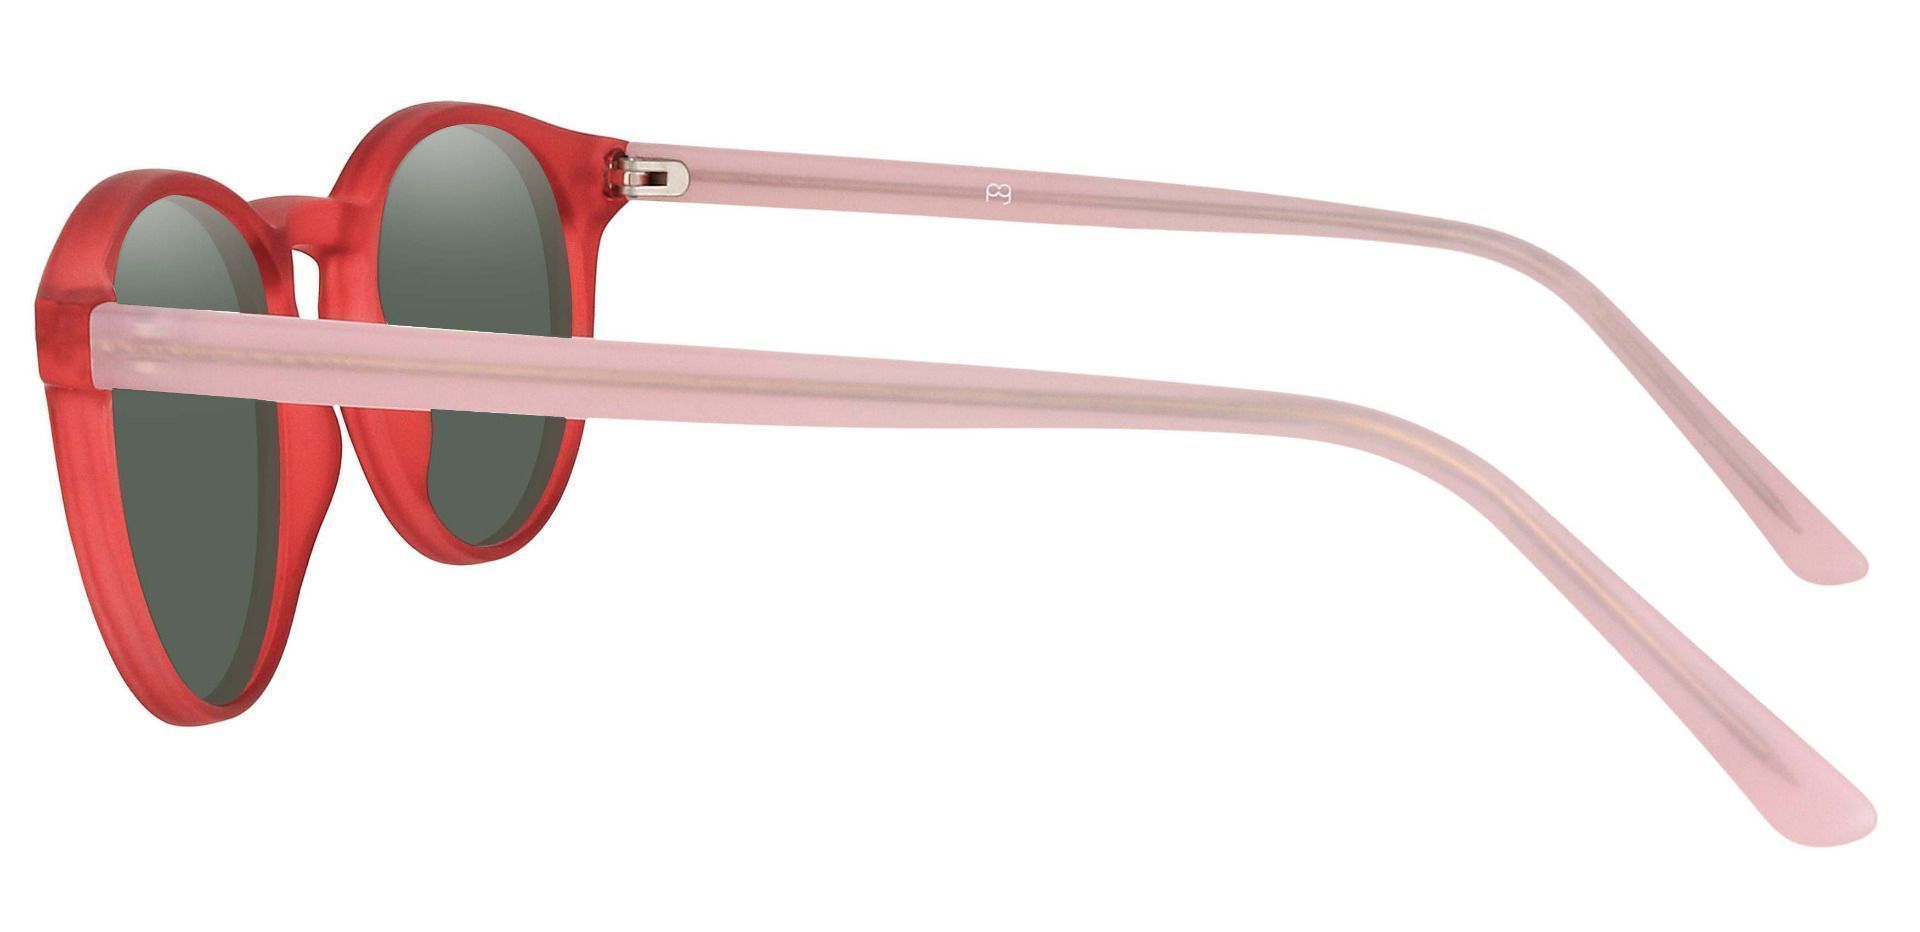 Harmony Oval Prescription Sunglasses - Red Frame With Green Lenses